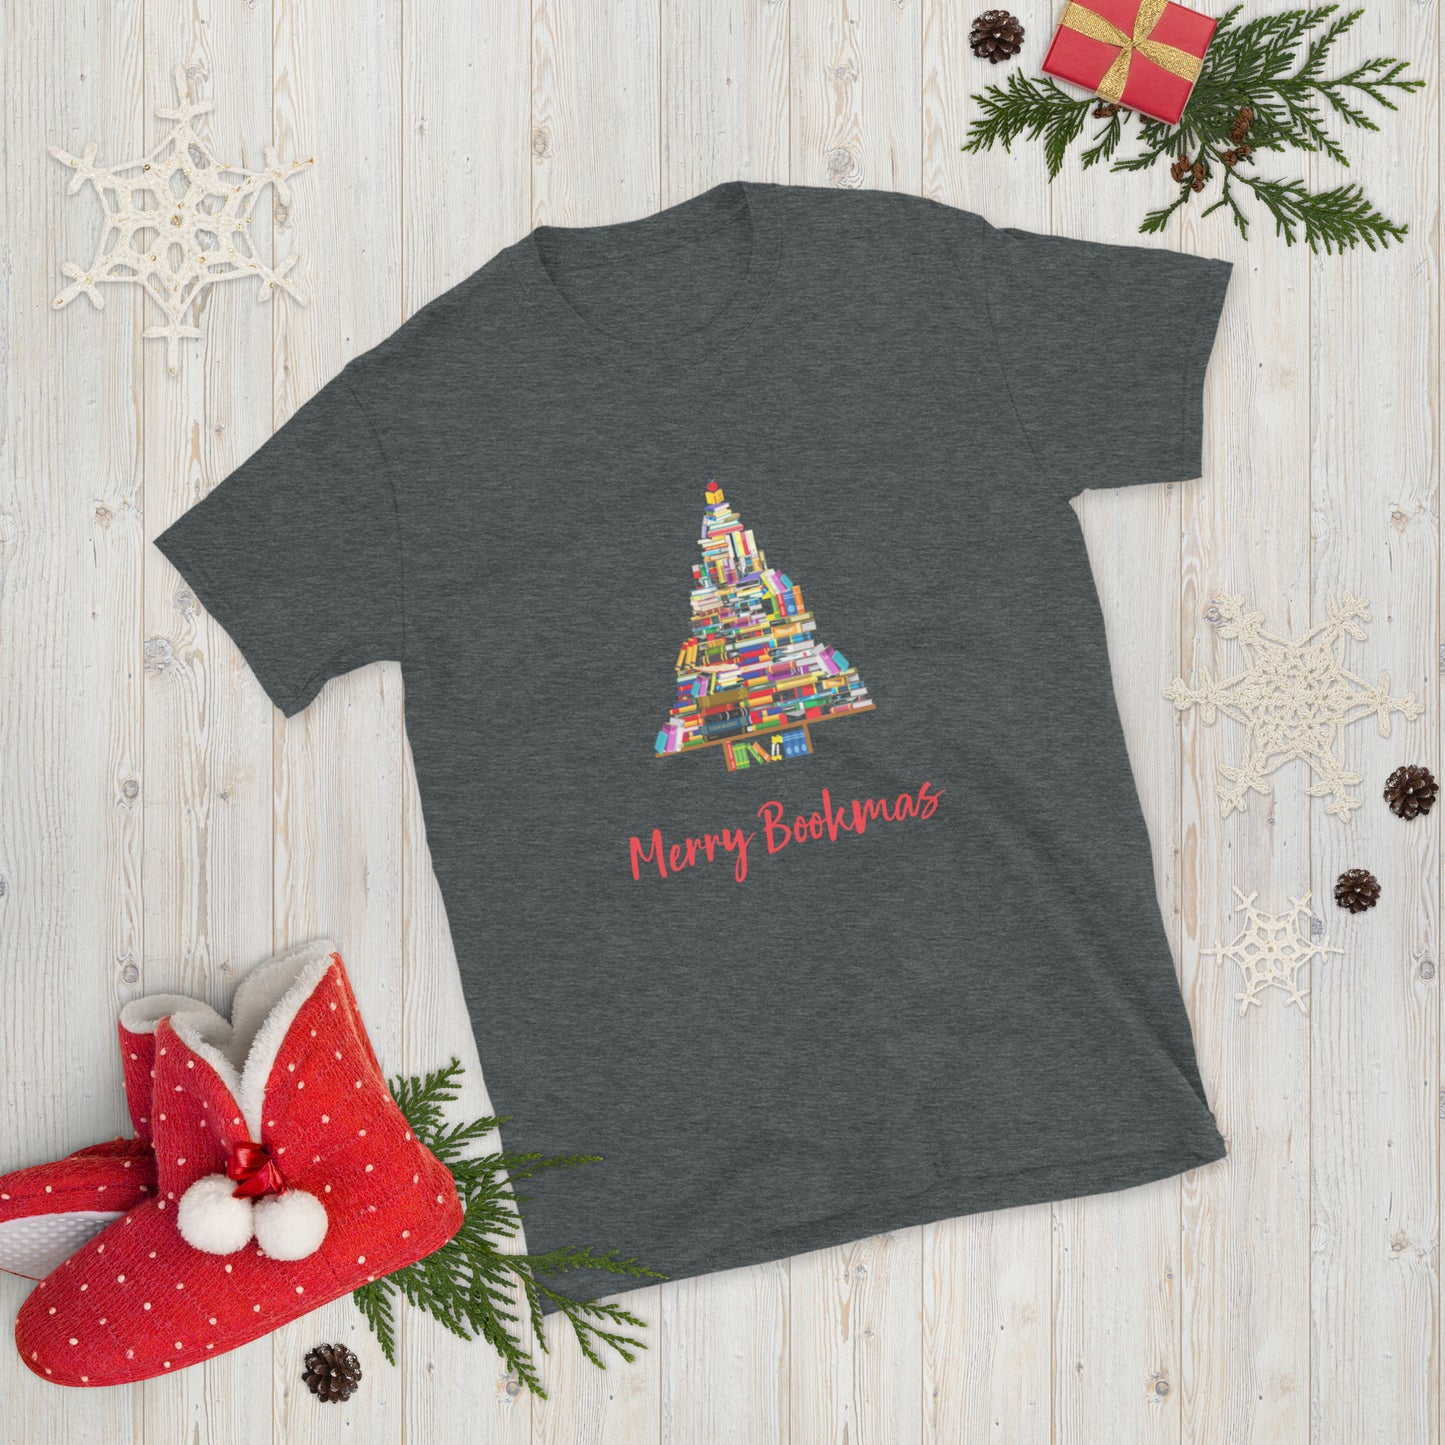 Merry Bookmas Short-Sleeve Unisex T-Shirt - The Spinster Librarian Shop